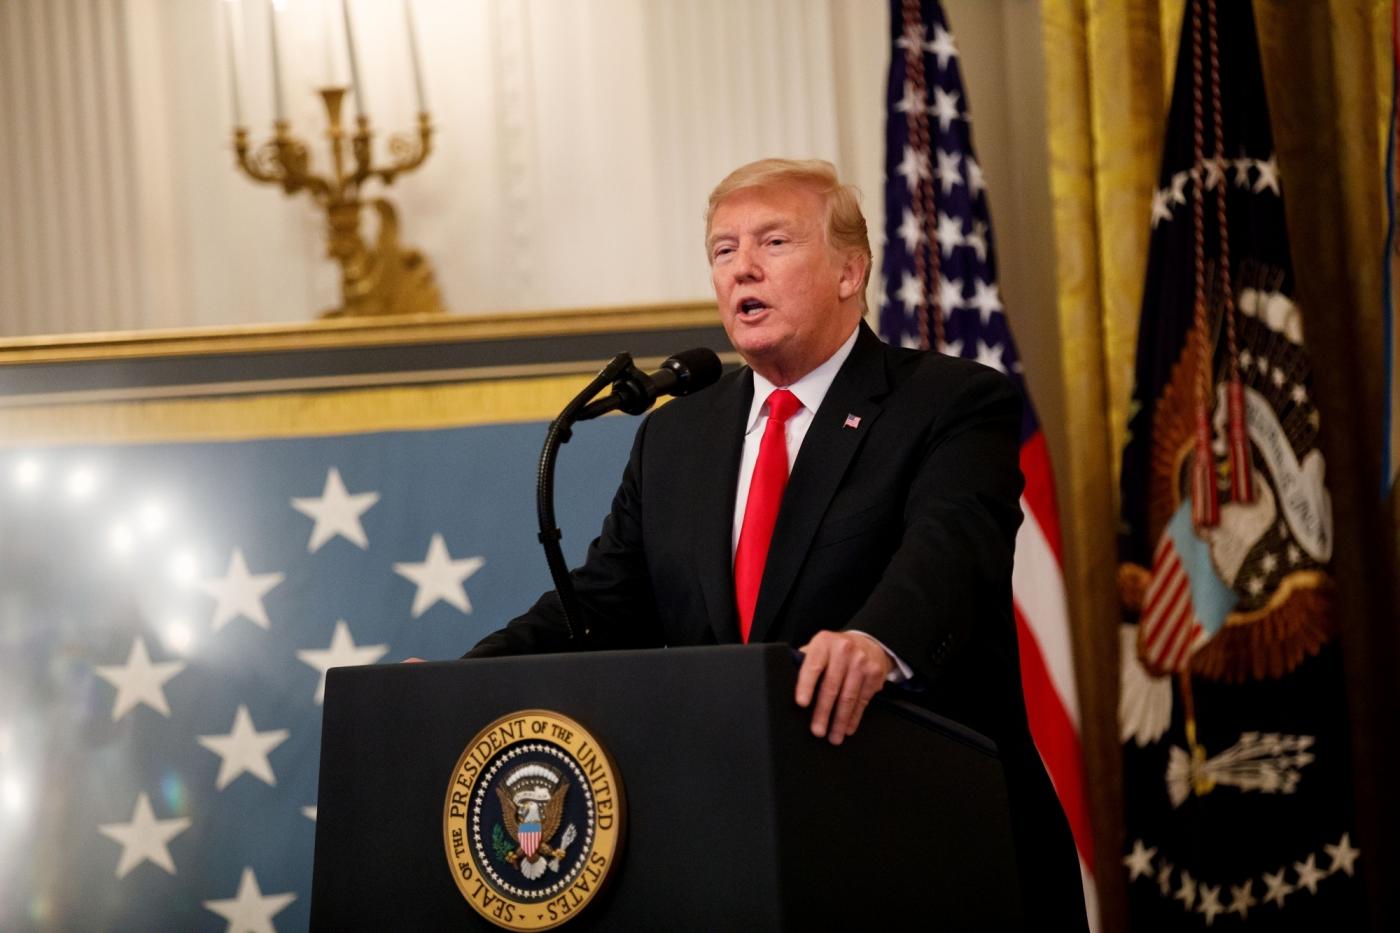 WASHINGTON D.C., Sept. 13, 2018 (Xinhua) -- U.S. President Donald Trump speaks during a Congressional Medal of Honor Society Reception at the White House in Washington D.C., the United States, on Sept. 12, 2018. (Xinhua/Ting Shen/IANS) by .